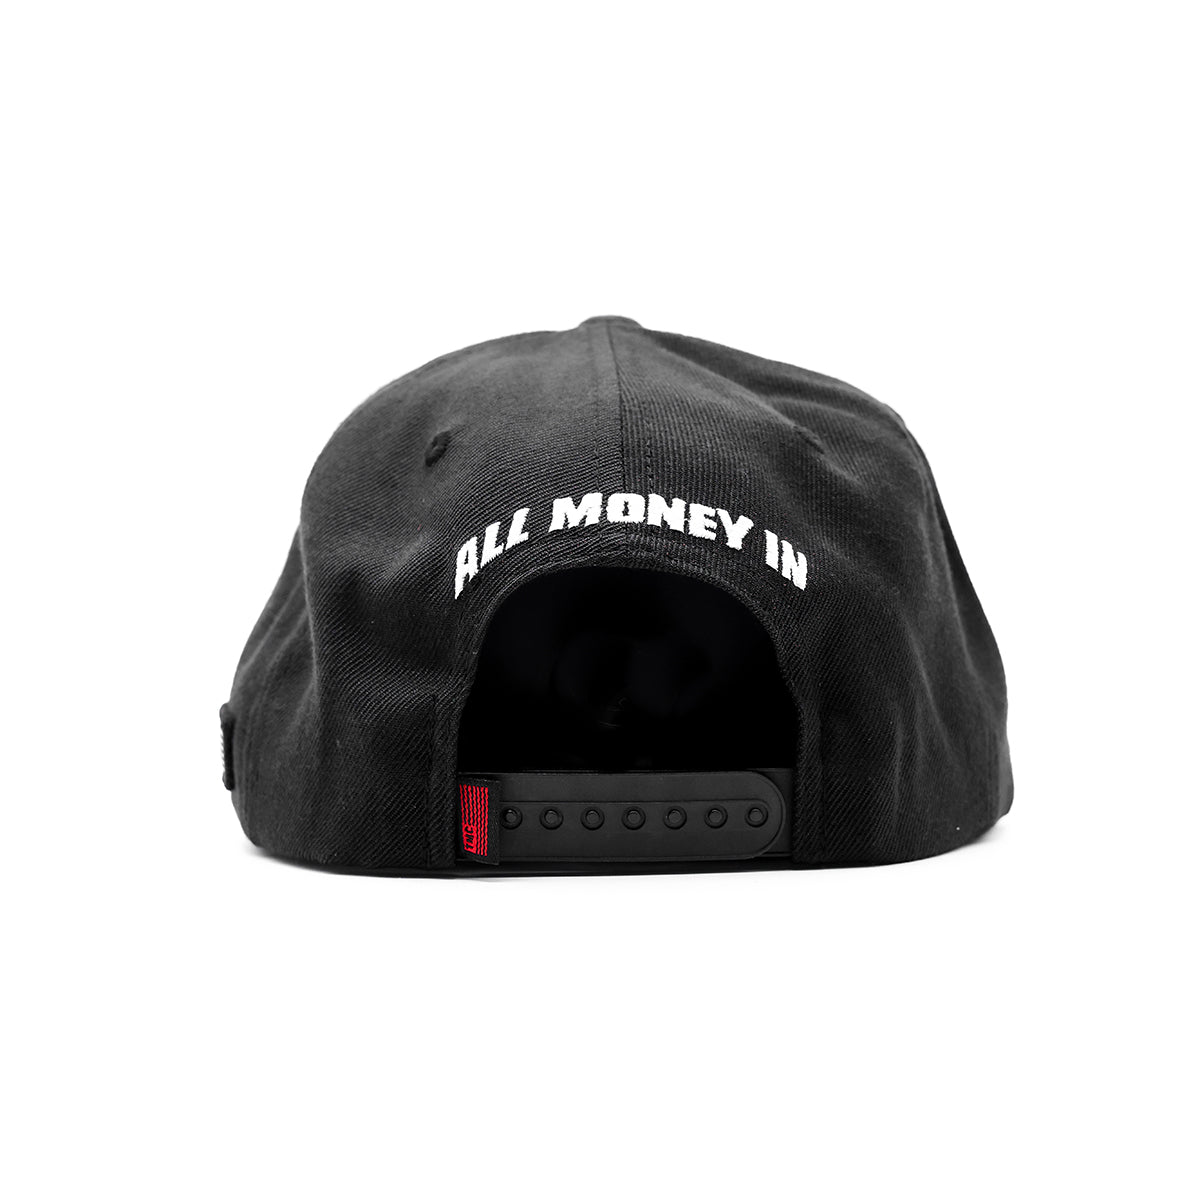 All Money In Armored Truck Limited Edition Snapback - Black/Black - Back